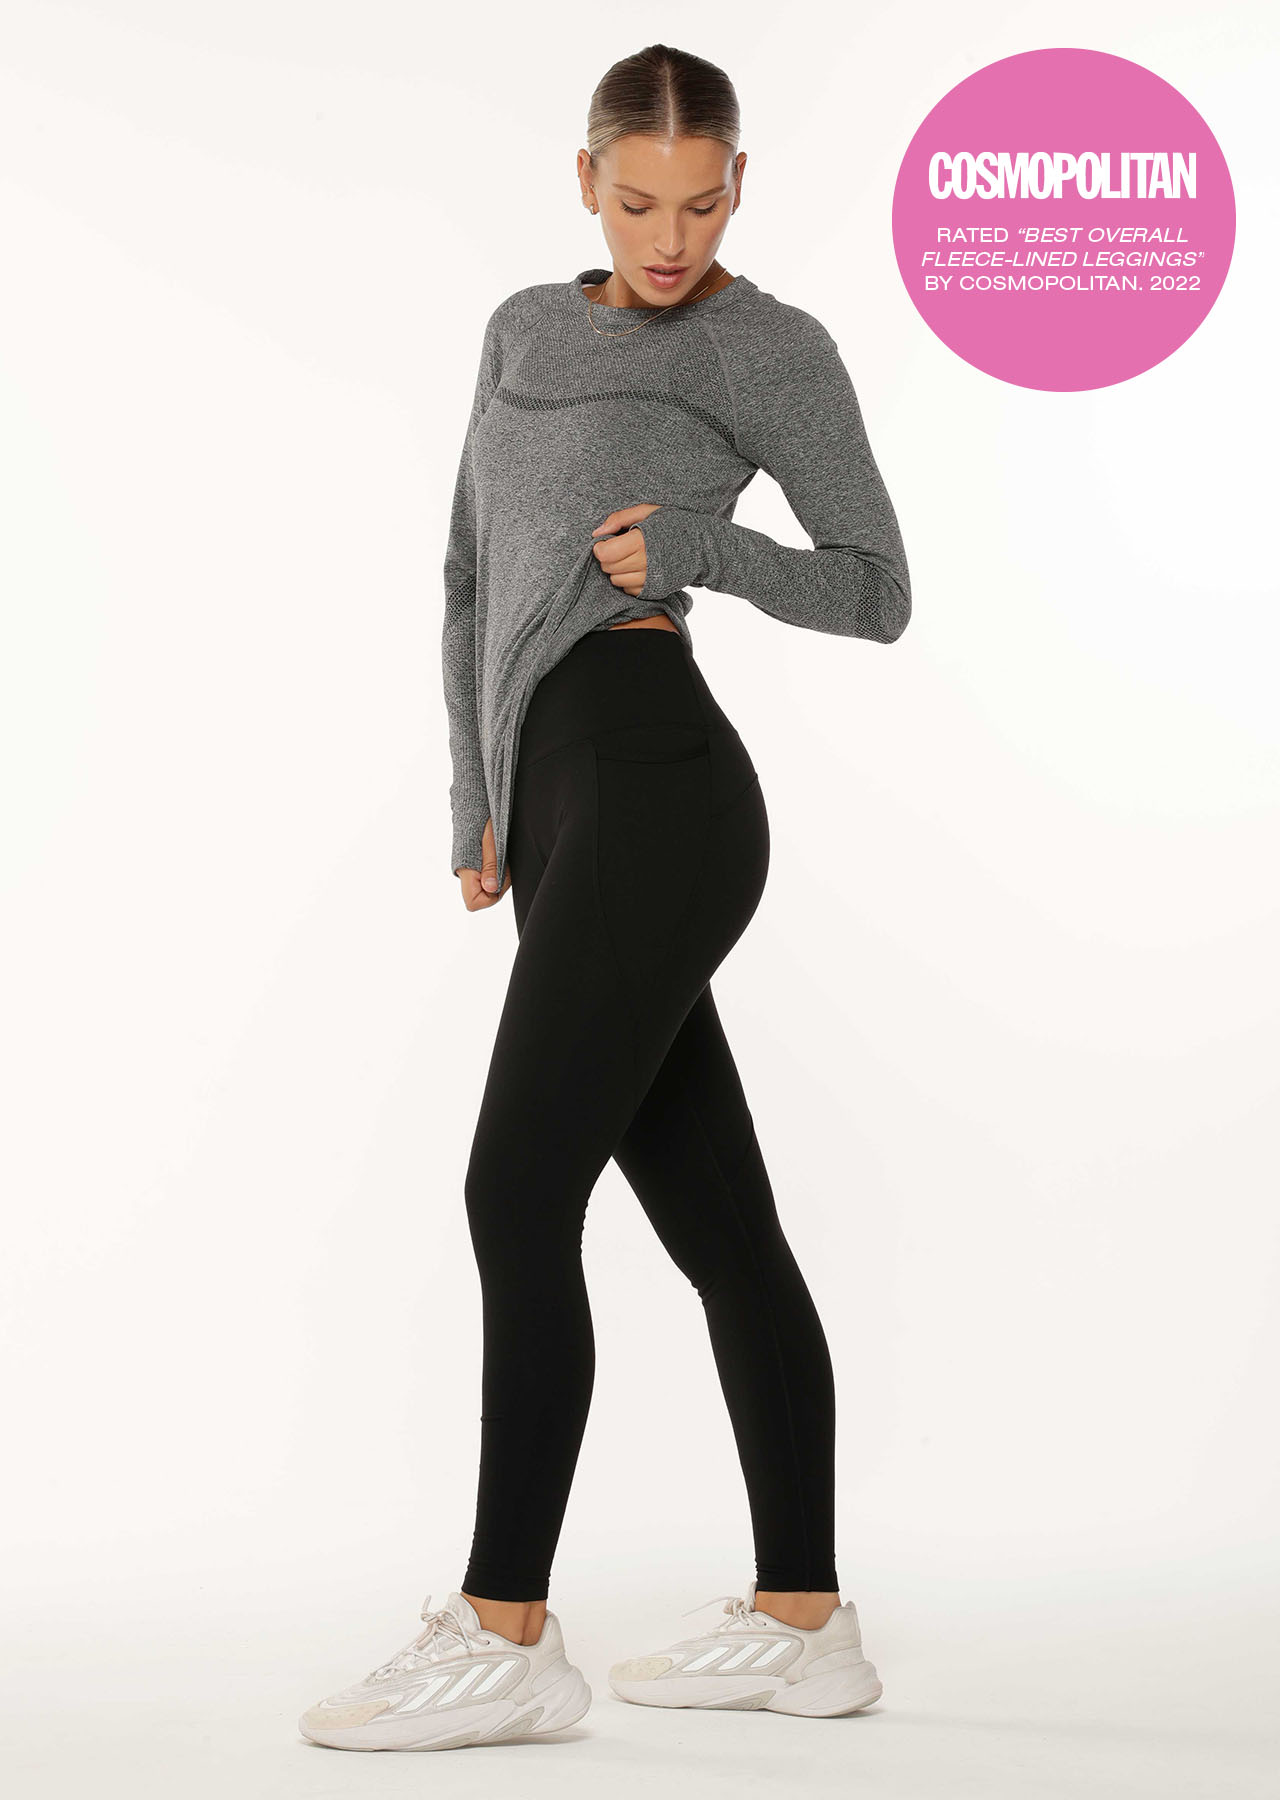 These bestselling fleece lined water resistant leggings for winter sports |  Daily Mail Online